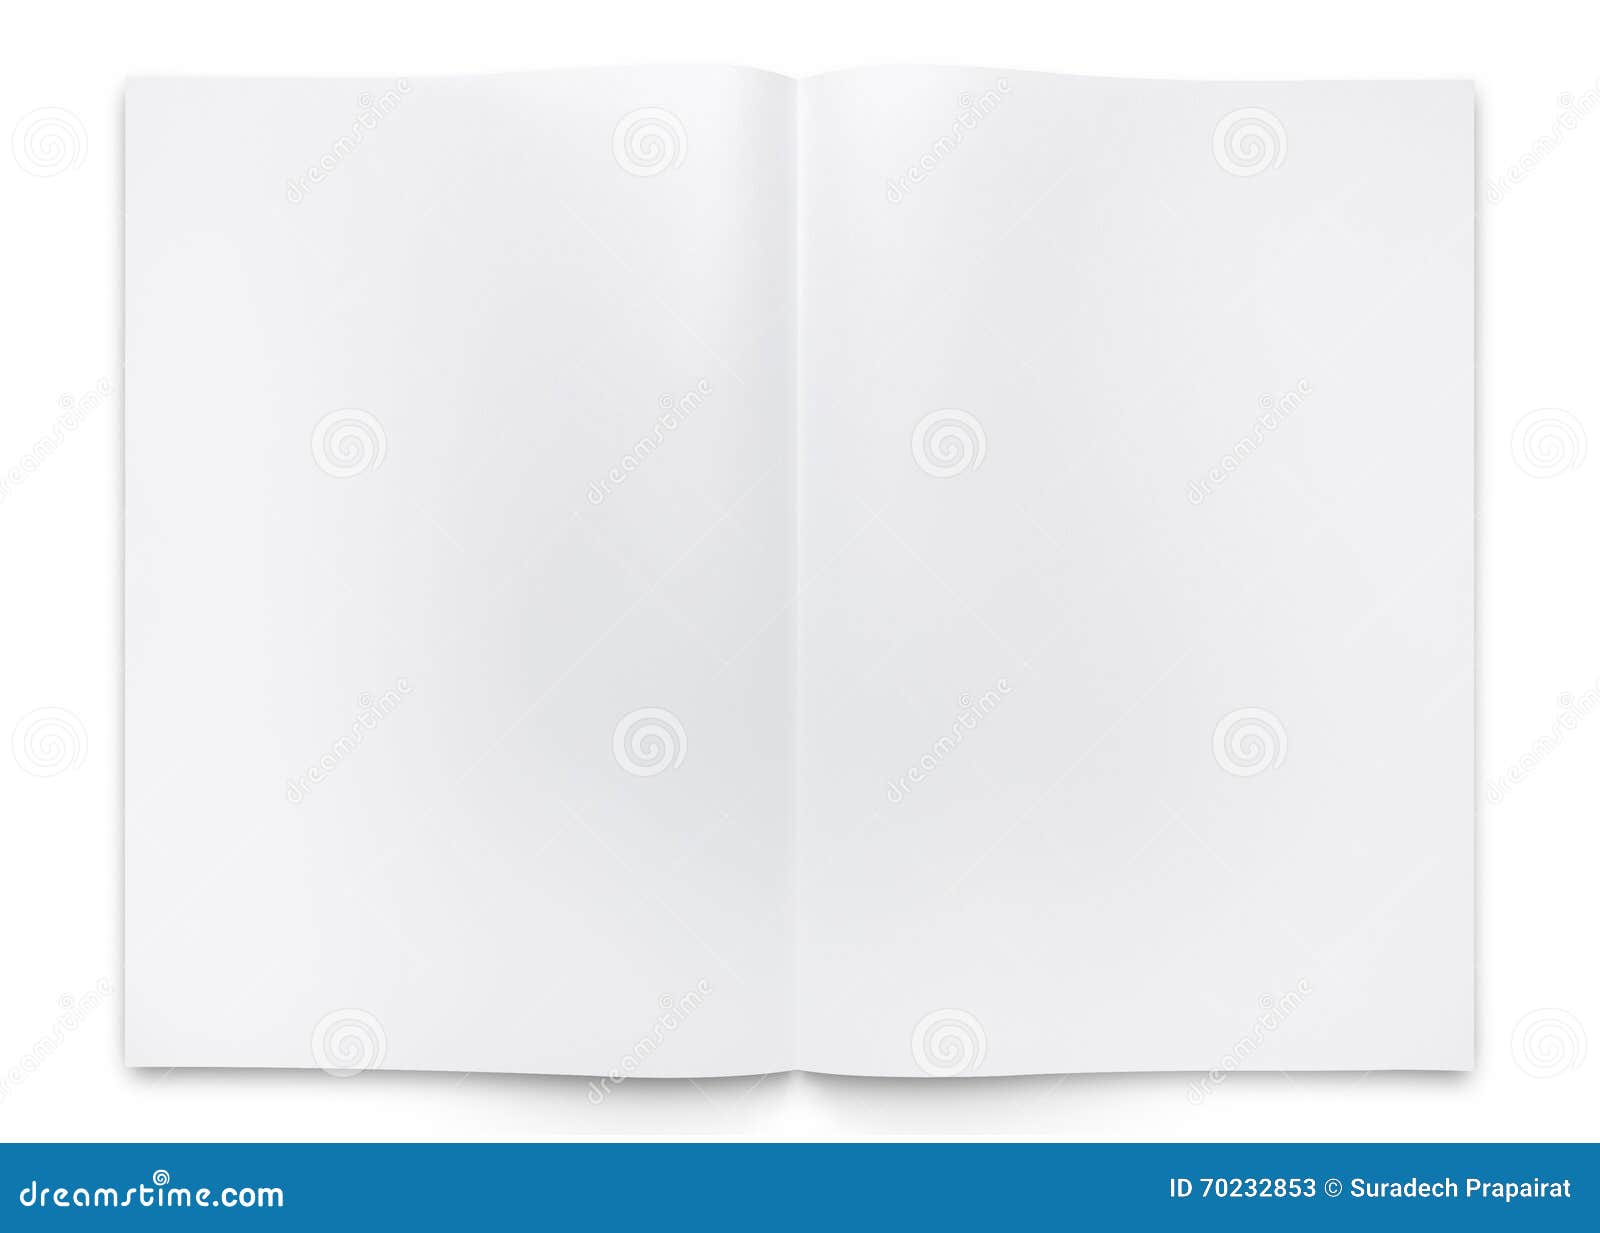 blank two fold paper brochure or book